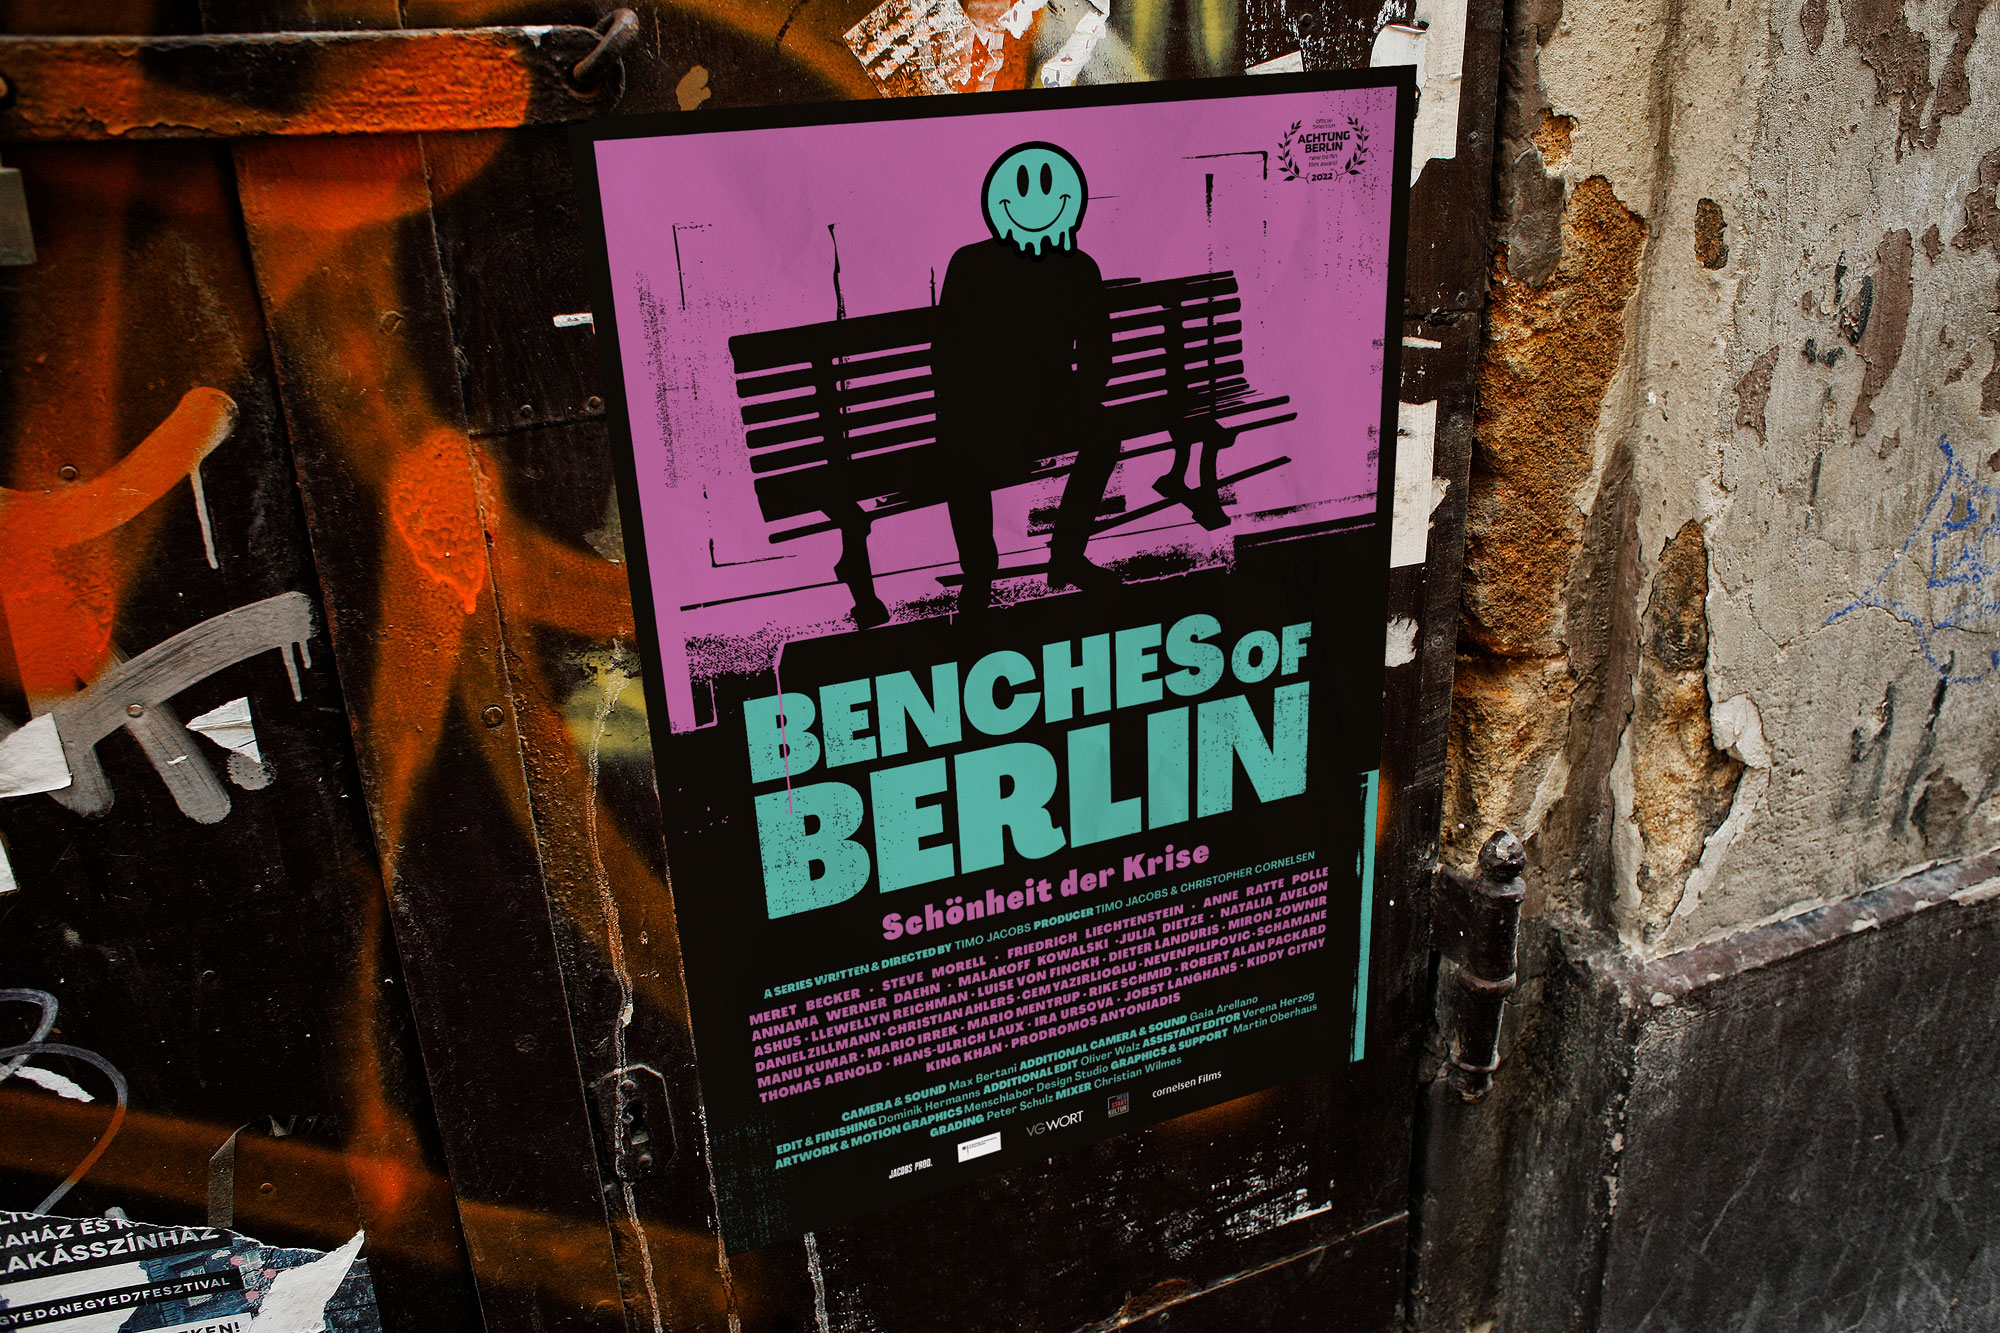 Benches of Berlin